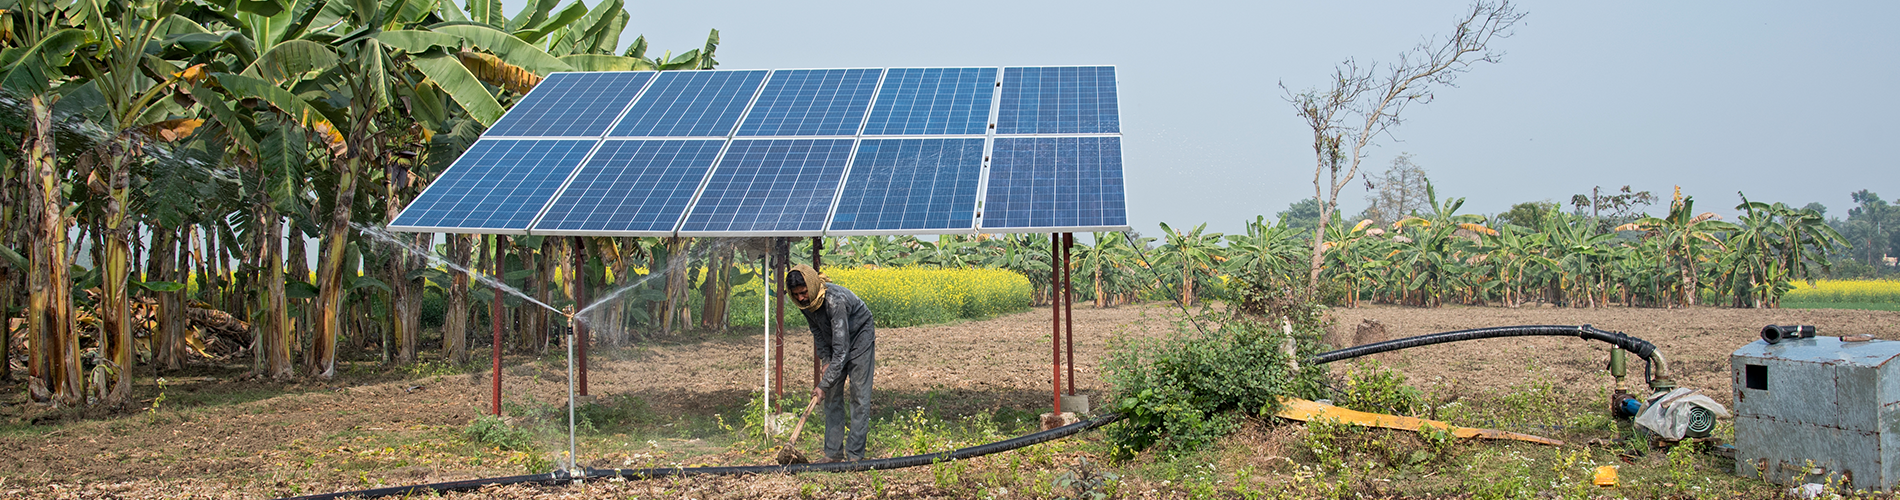 Powering Agriculture – Community based Solar Pump